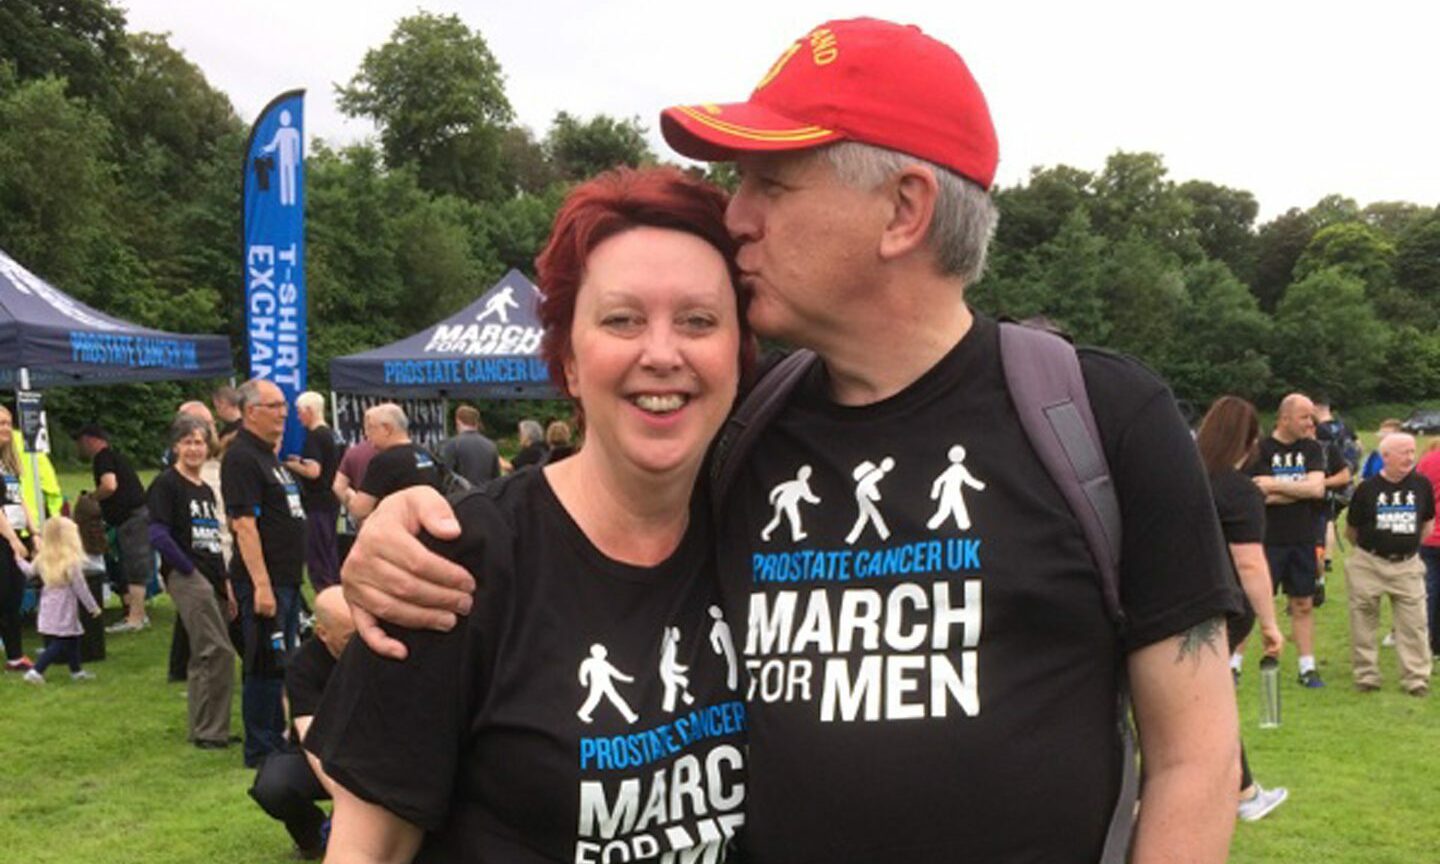 Brian, who moved to Barra after prostate cancer treatment, pictured with wife Joan at a charity march.